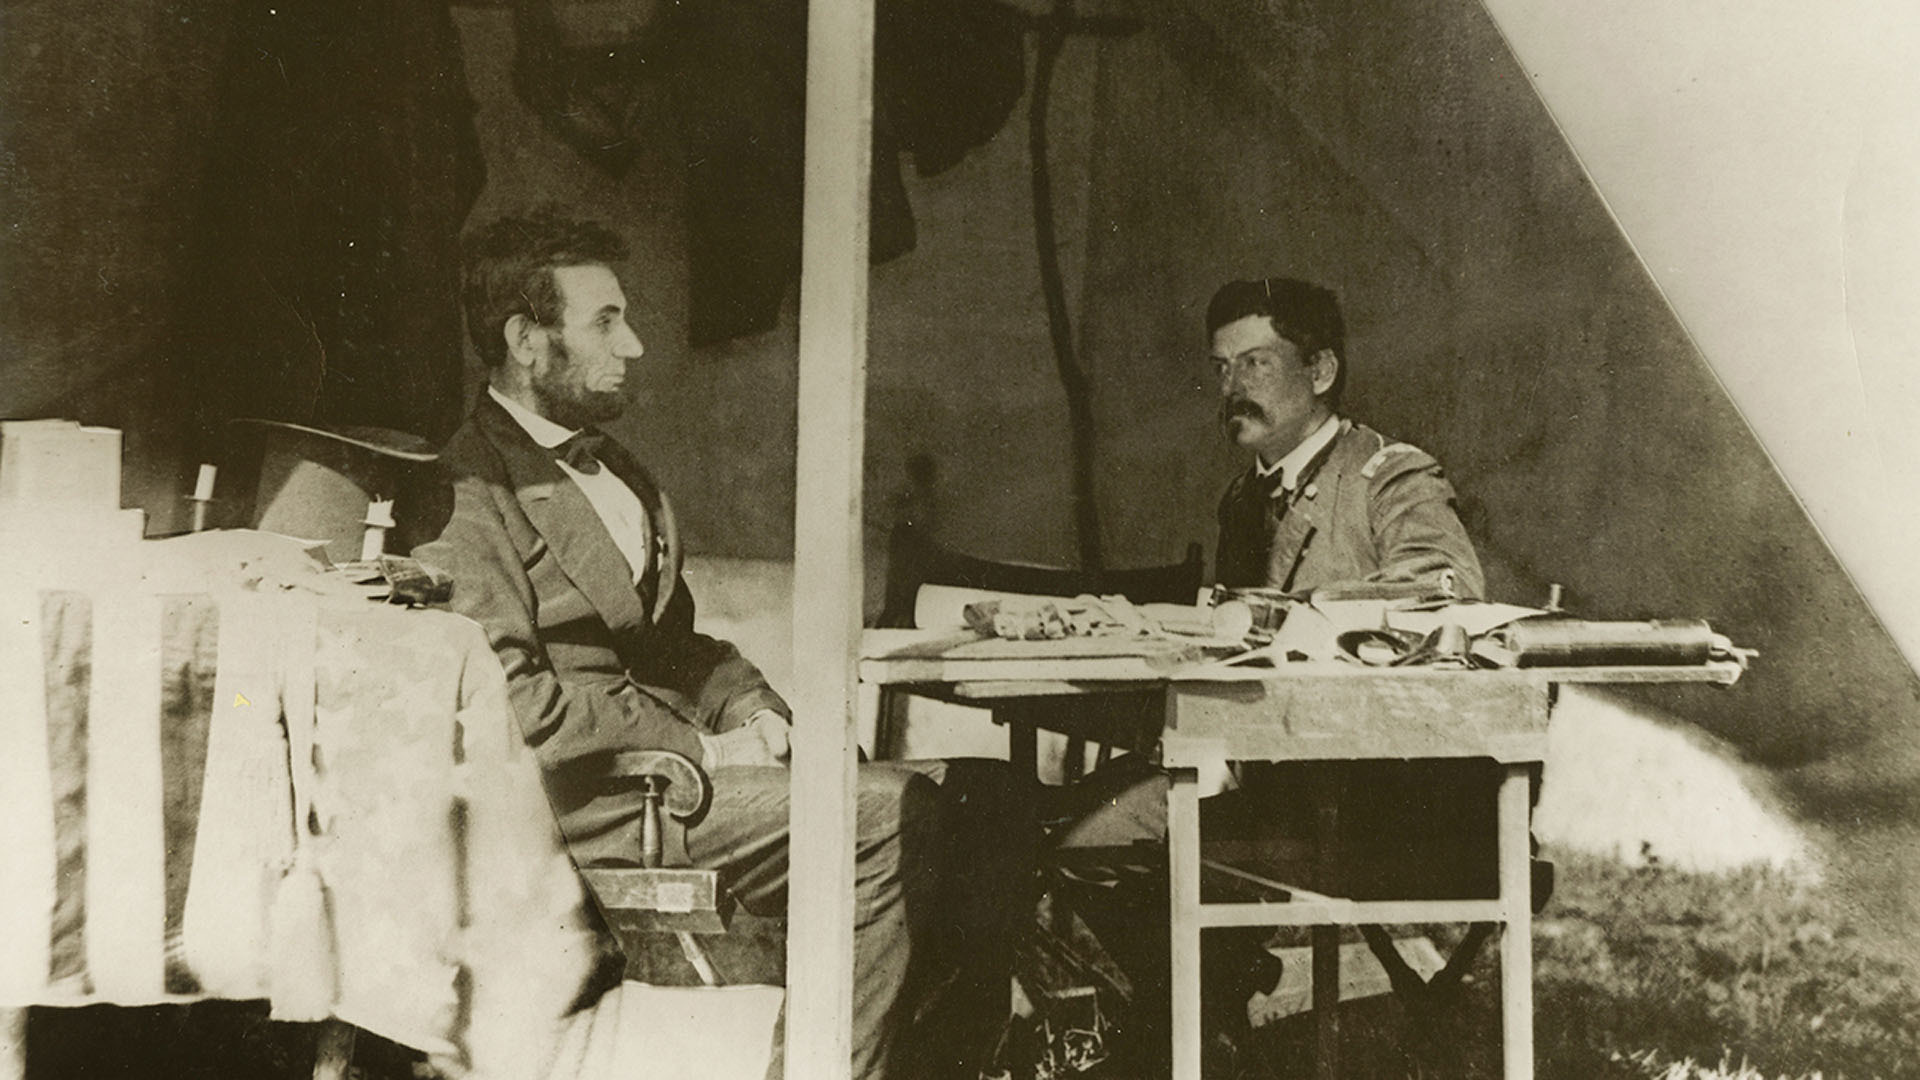 A sepia-toned photo showing Abraham Lincoln and General George McClellan seated, looking at one another, in Antietam, Maryland, circa 1862.